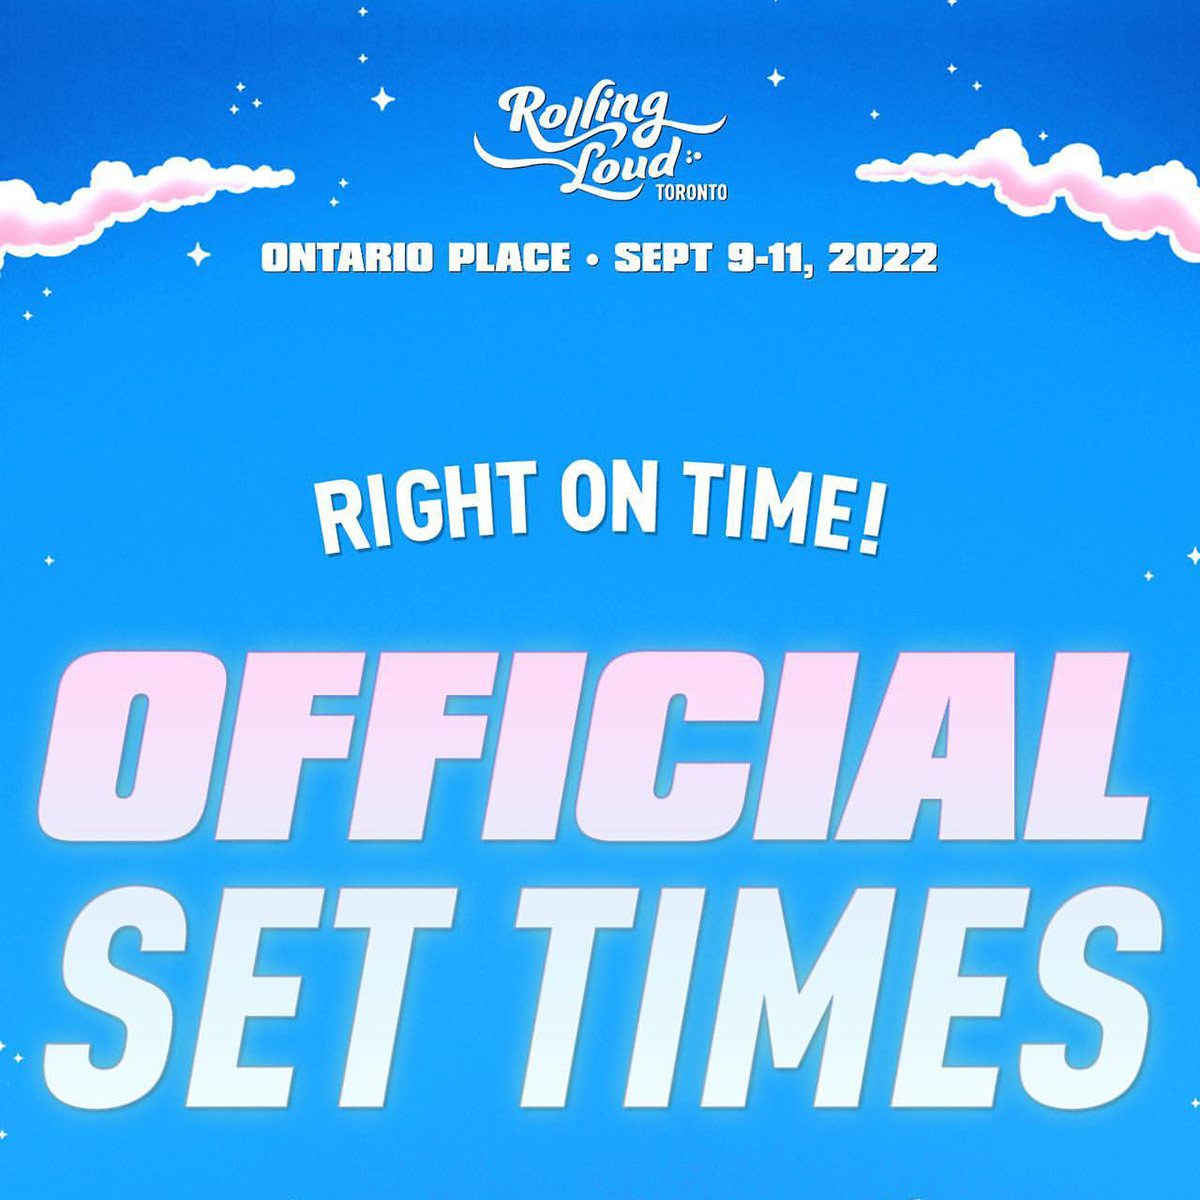 Rolling Loud Toronto Day 1: Official artist list & set times